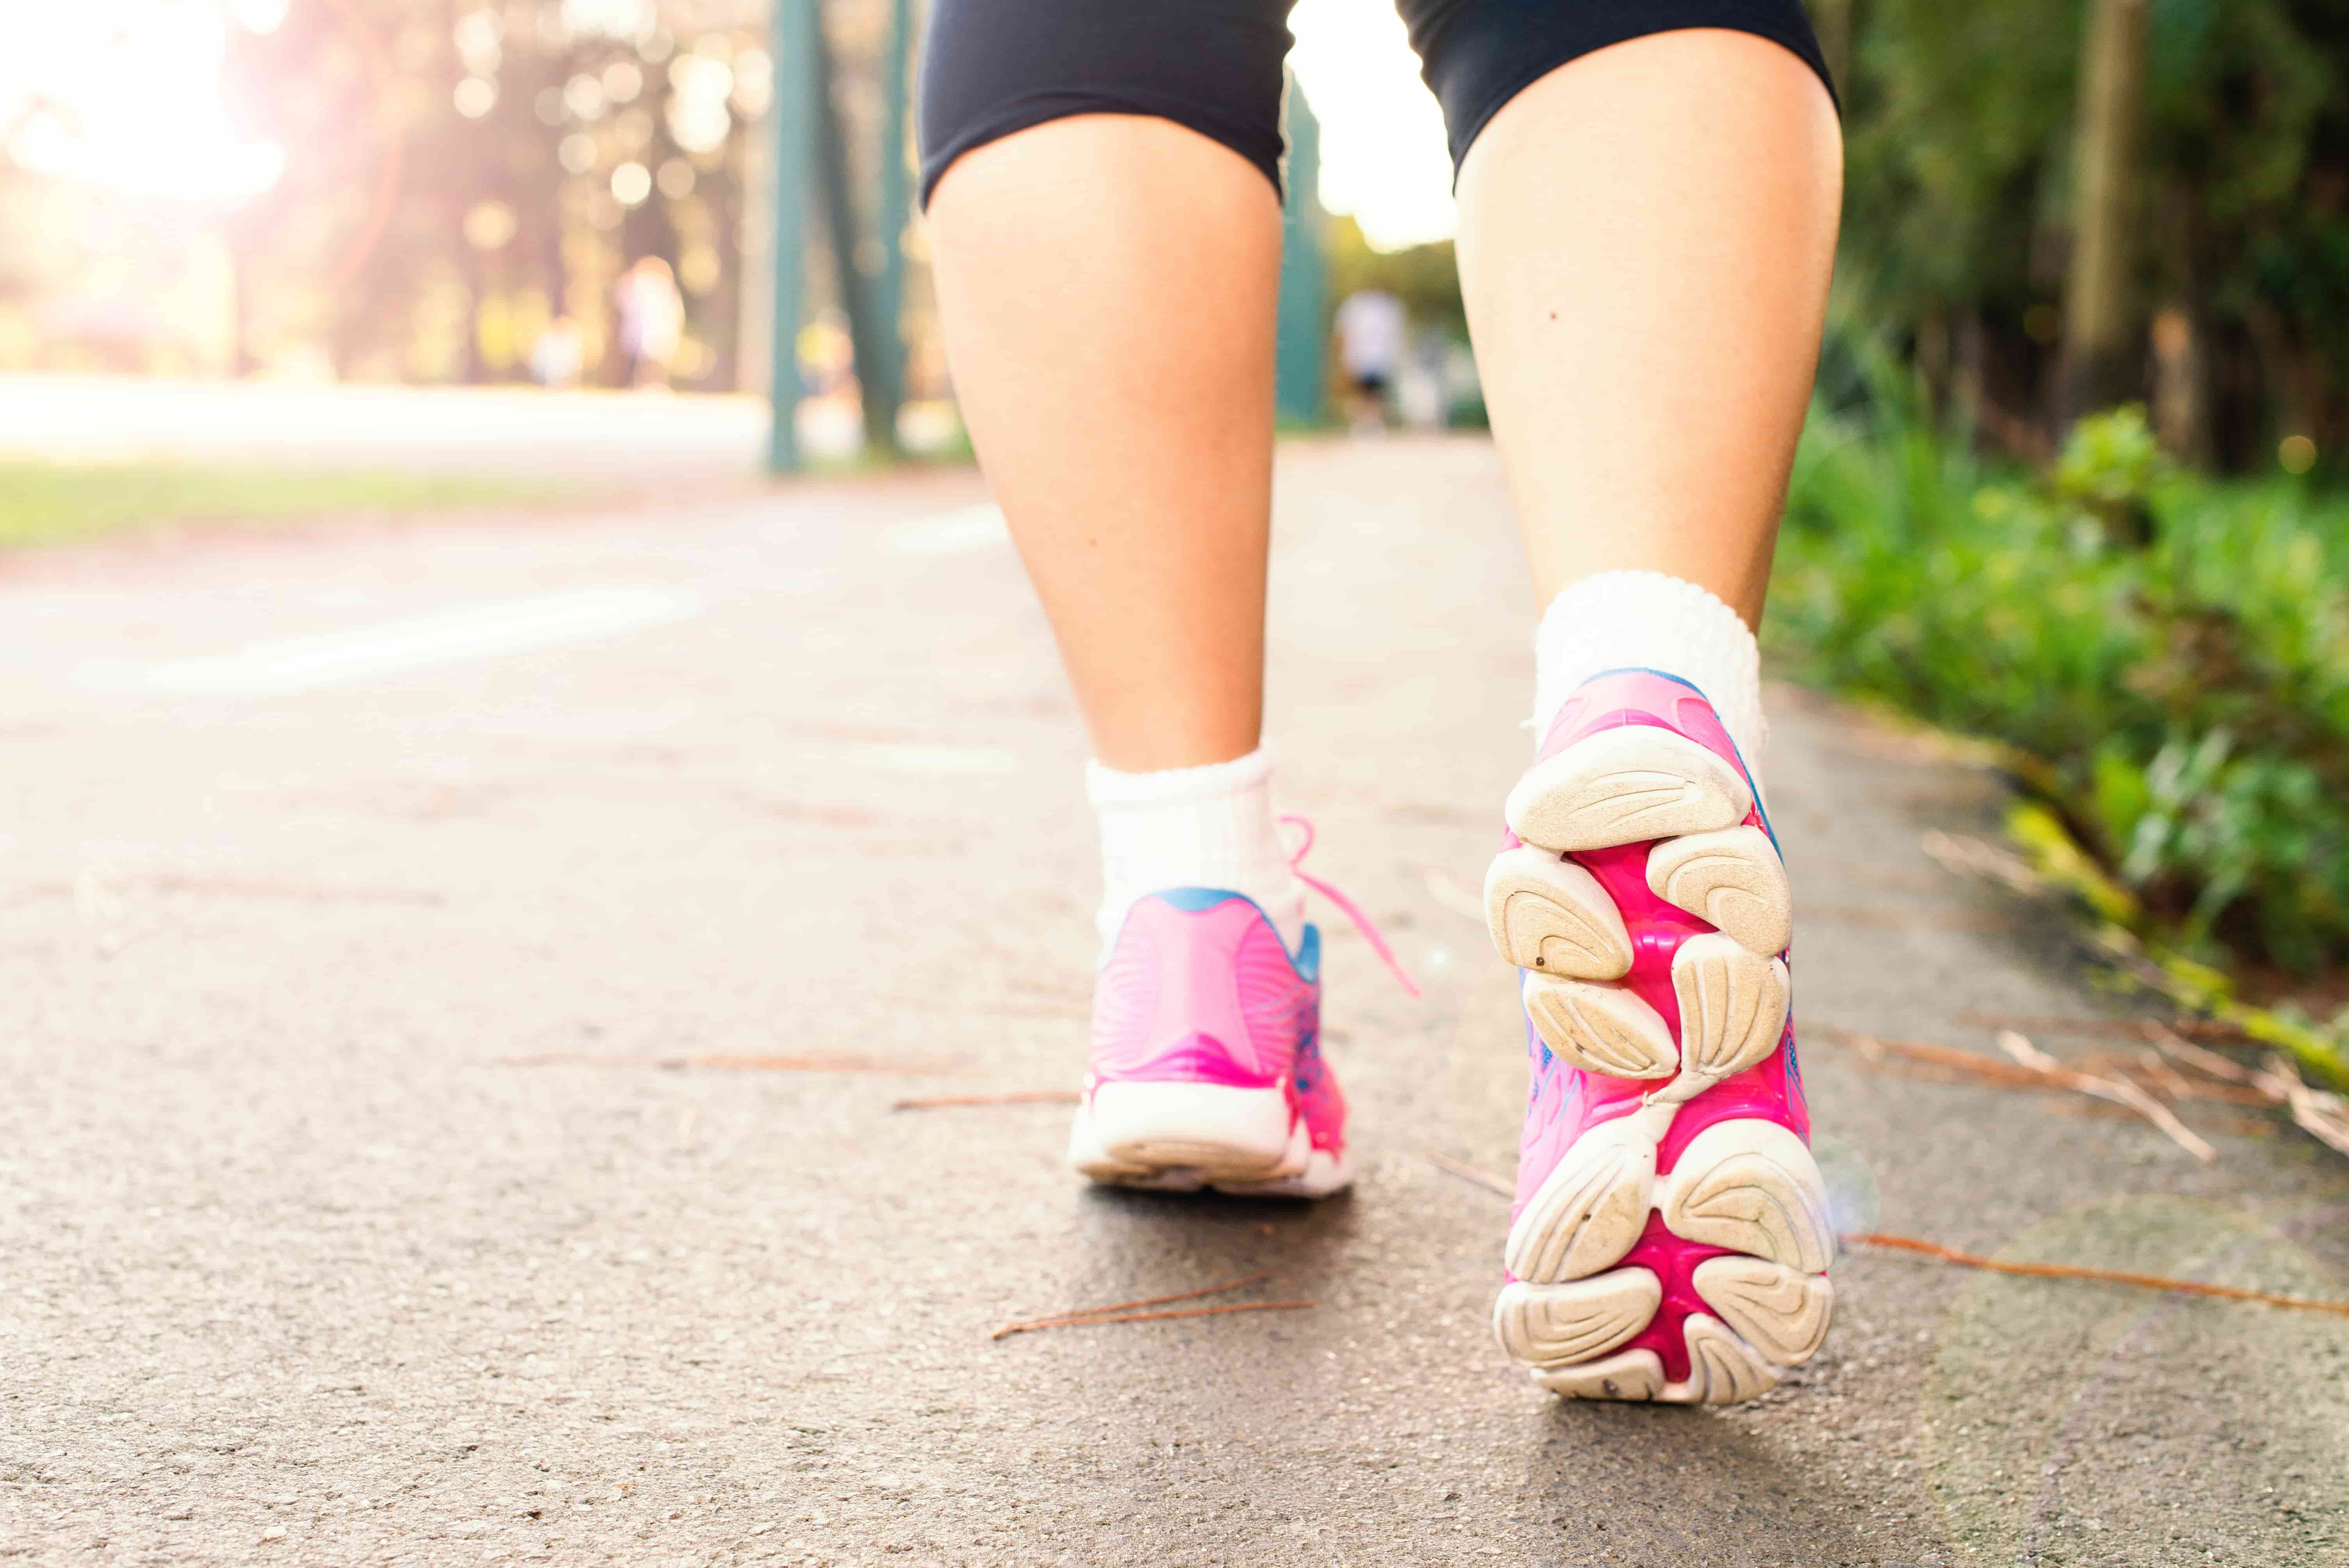 is walking good for spinal stenosis?